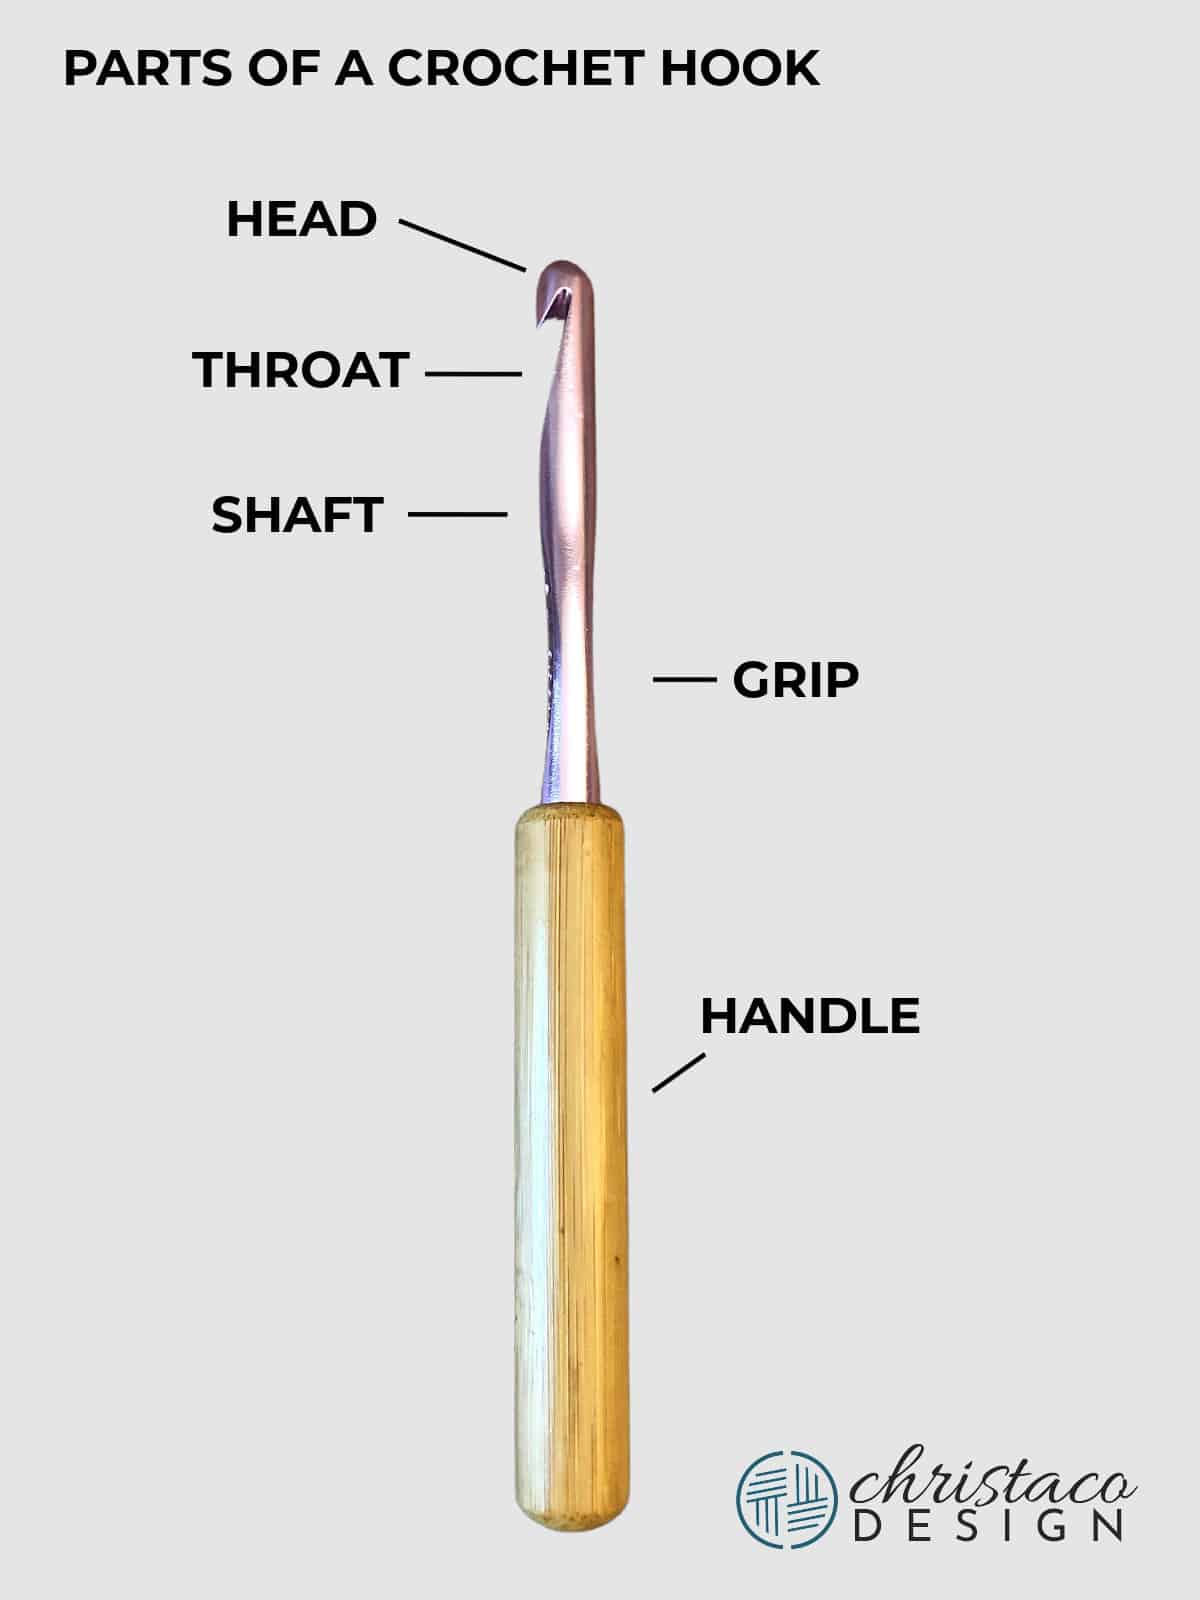 Crochet hook with wood handle and text labeling the parts of a crochet hook: head, throat, shaft, grip, handle.